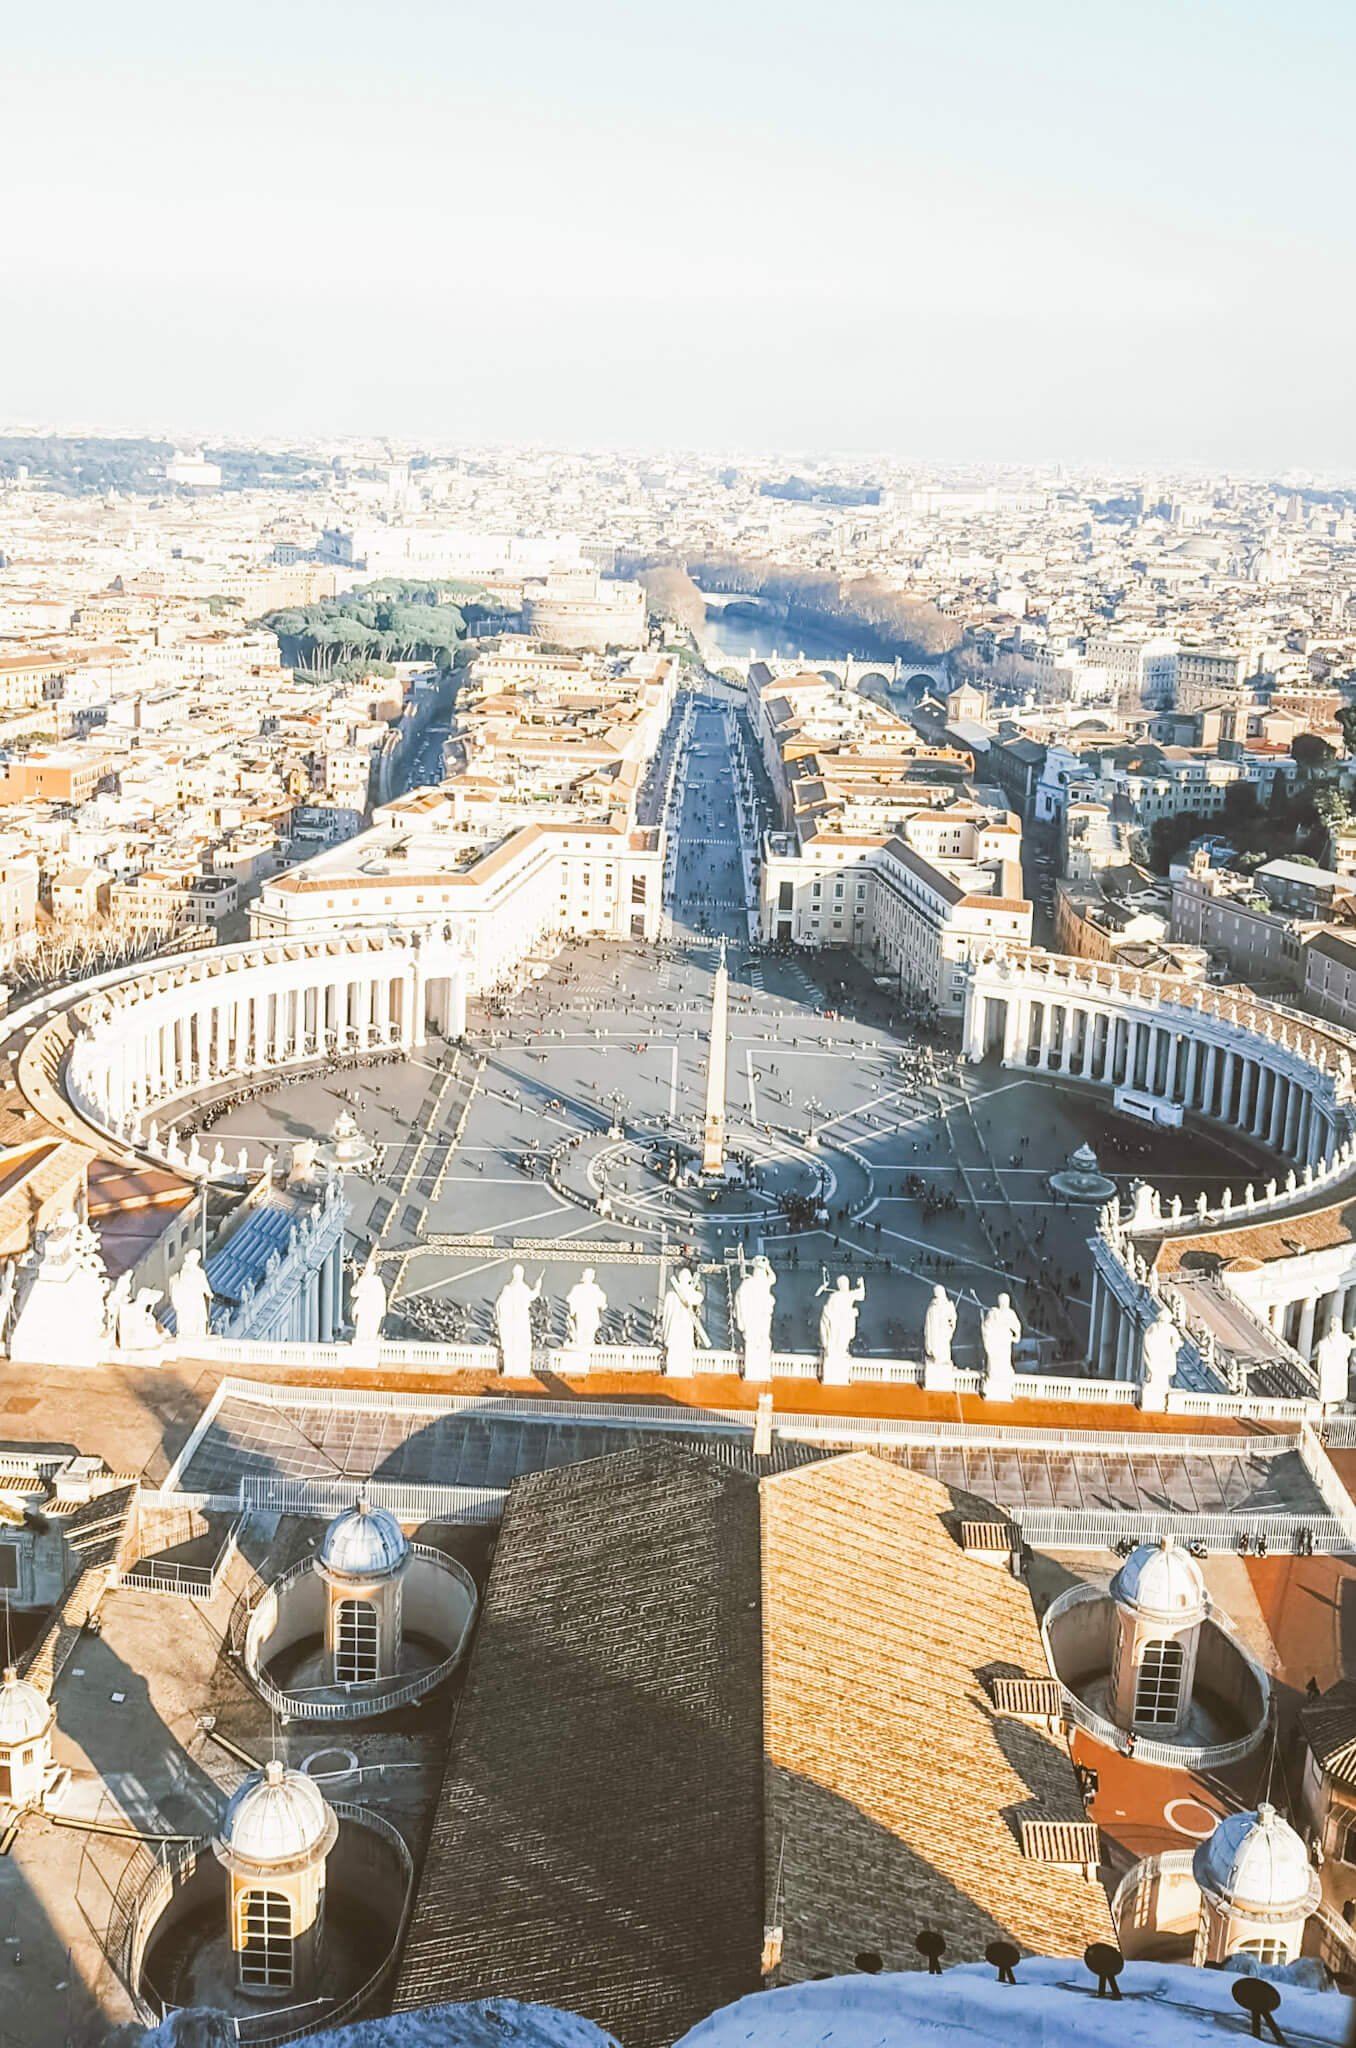 View from the top of St. Peter's Basilica in Rome